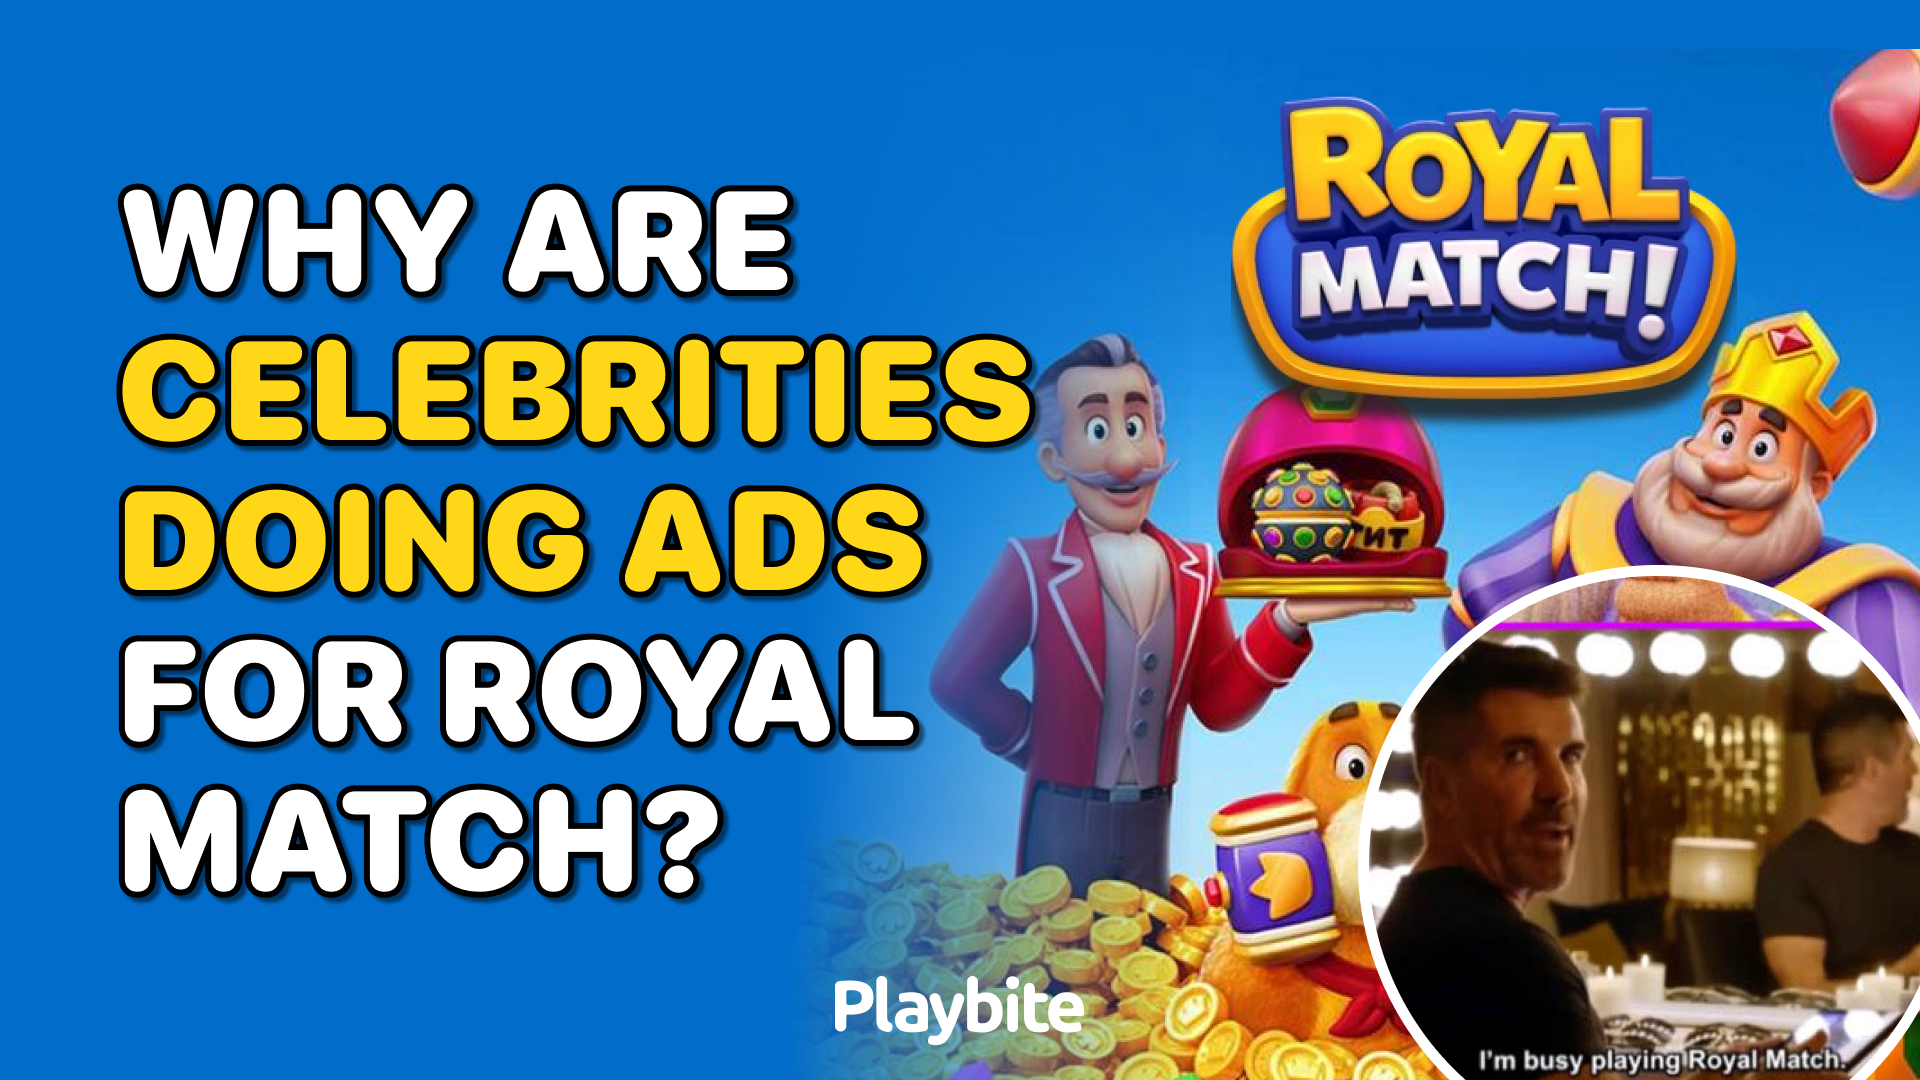 Why Are Celebrities Doing Ads for Royal Match?